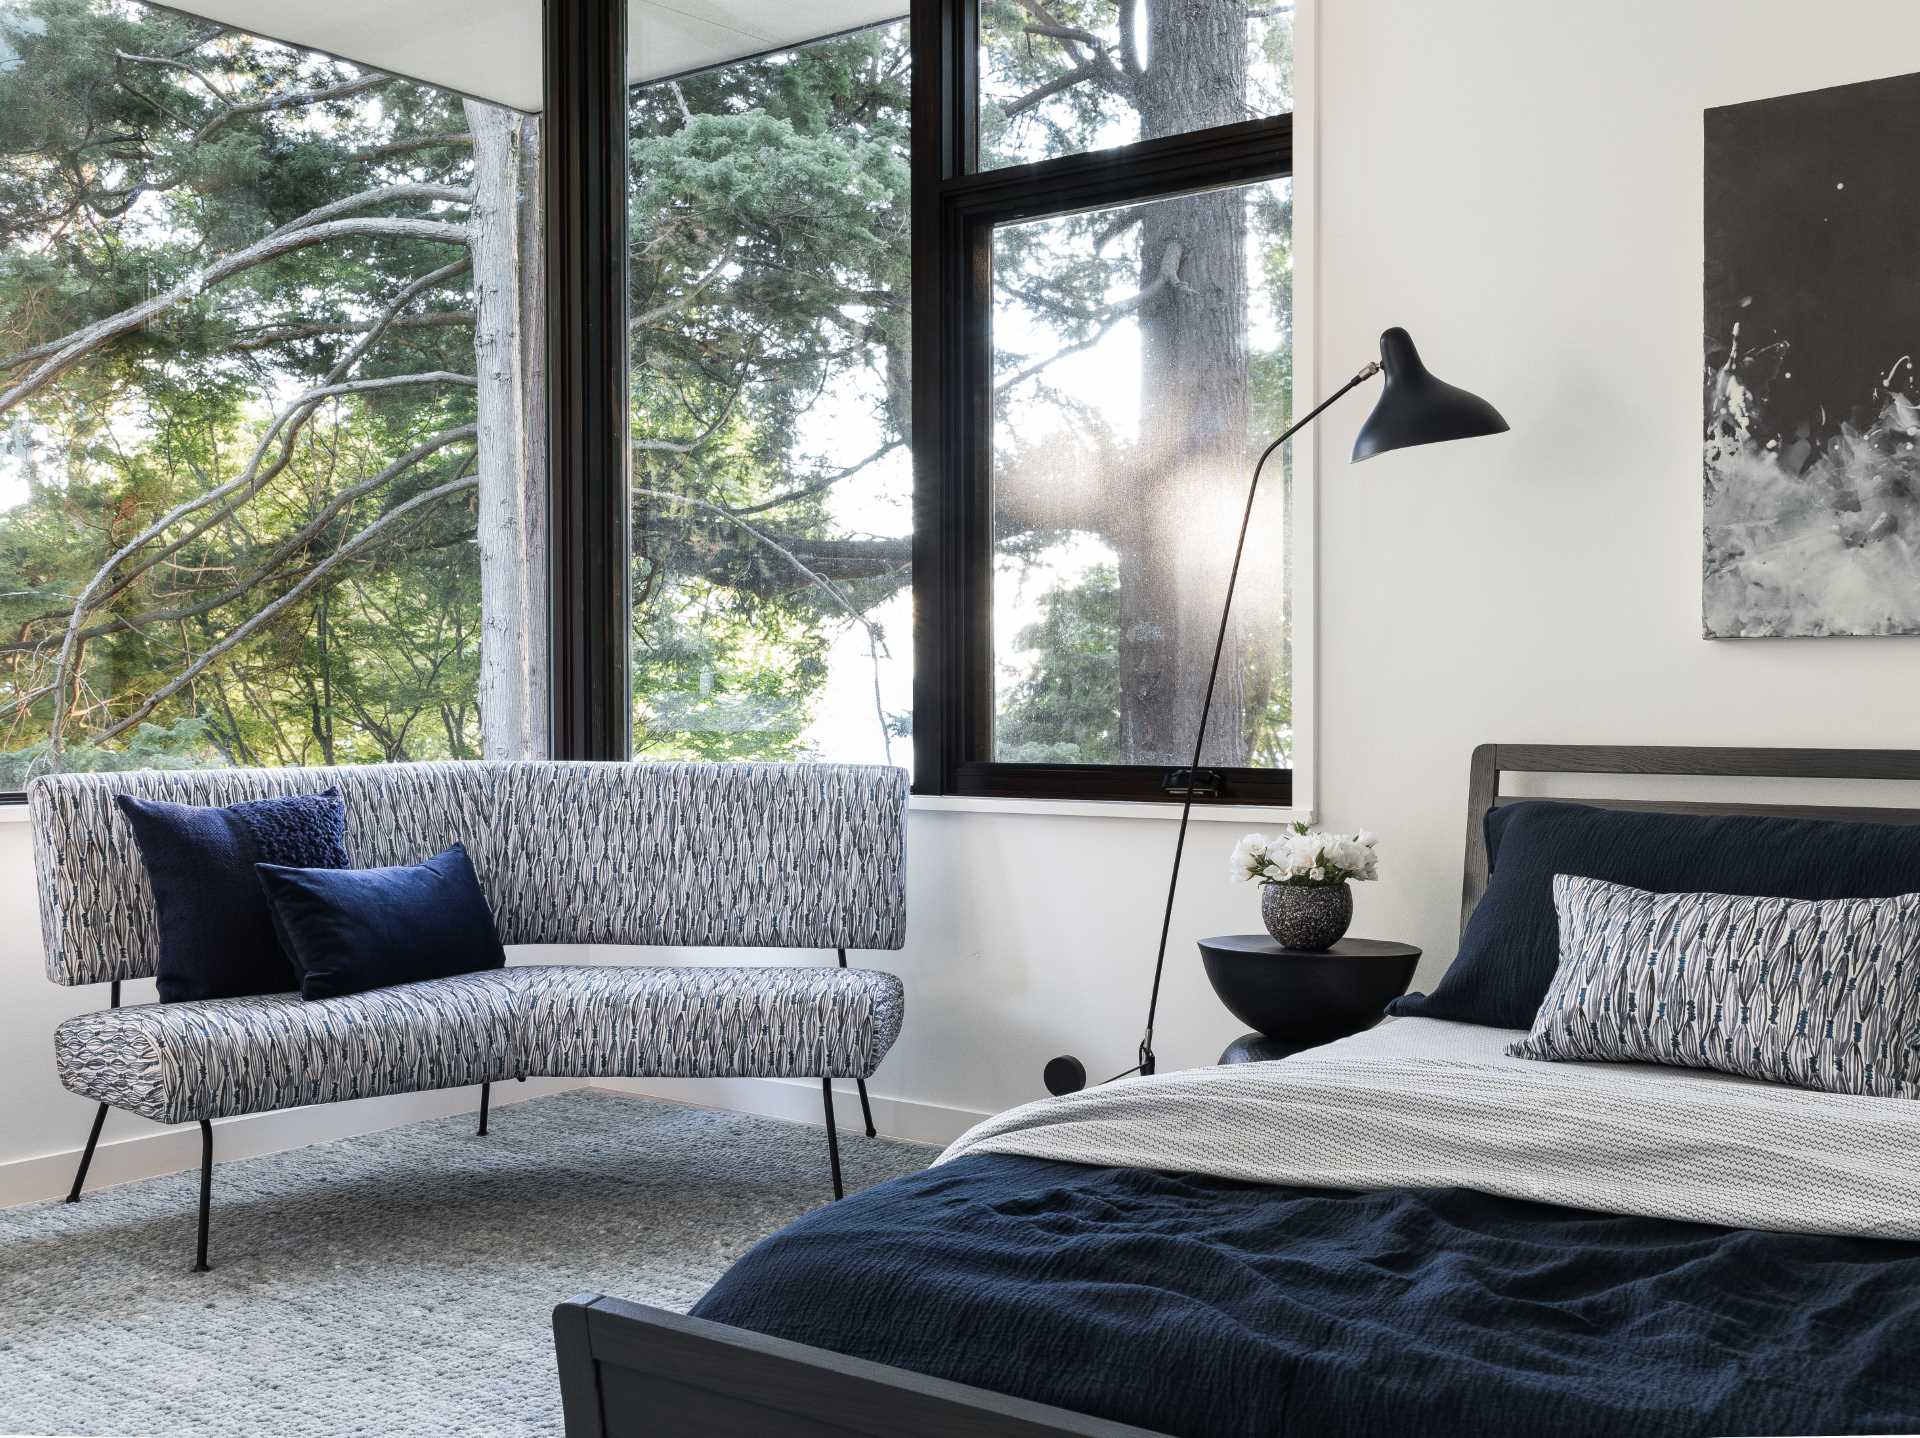 In this contemporary bedrooms, a sitting area is positioned by the window to take advantage of the views.